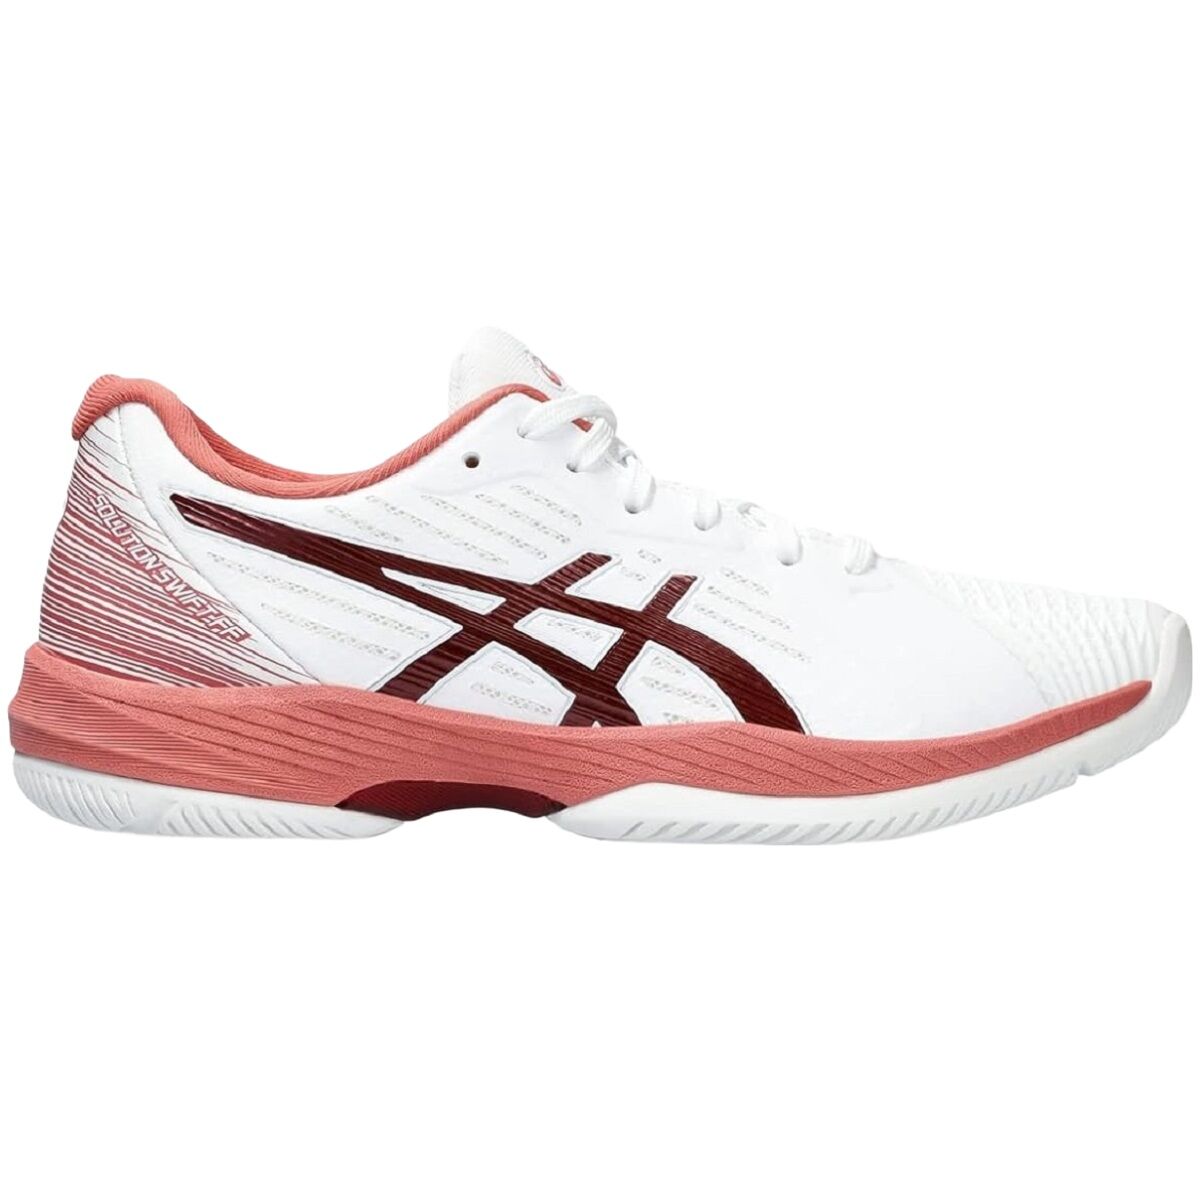 Asics Women's Solution Swift FF Tennis Shoes (White/Antique Red)